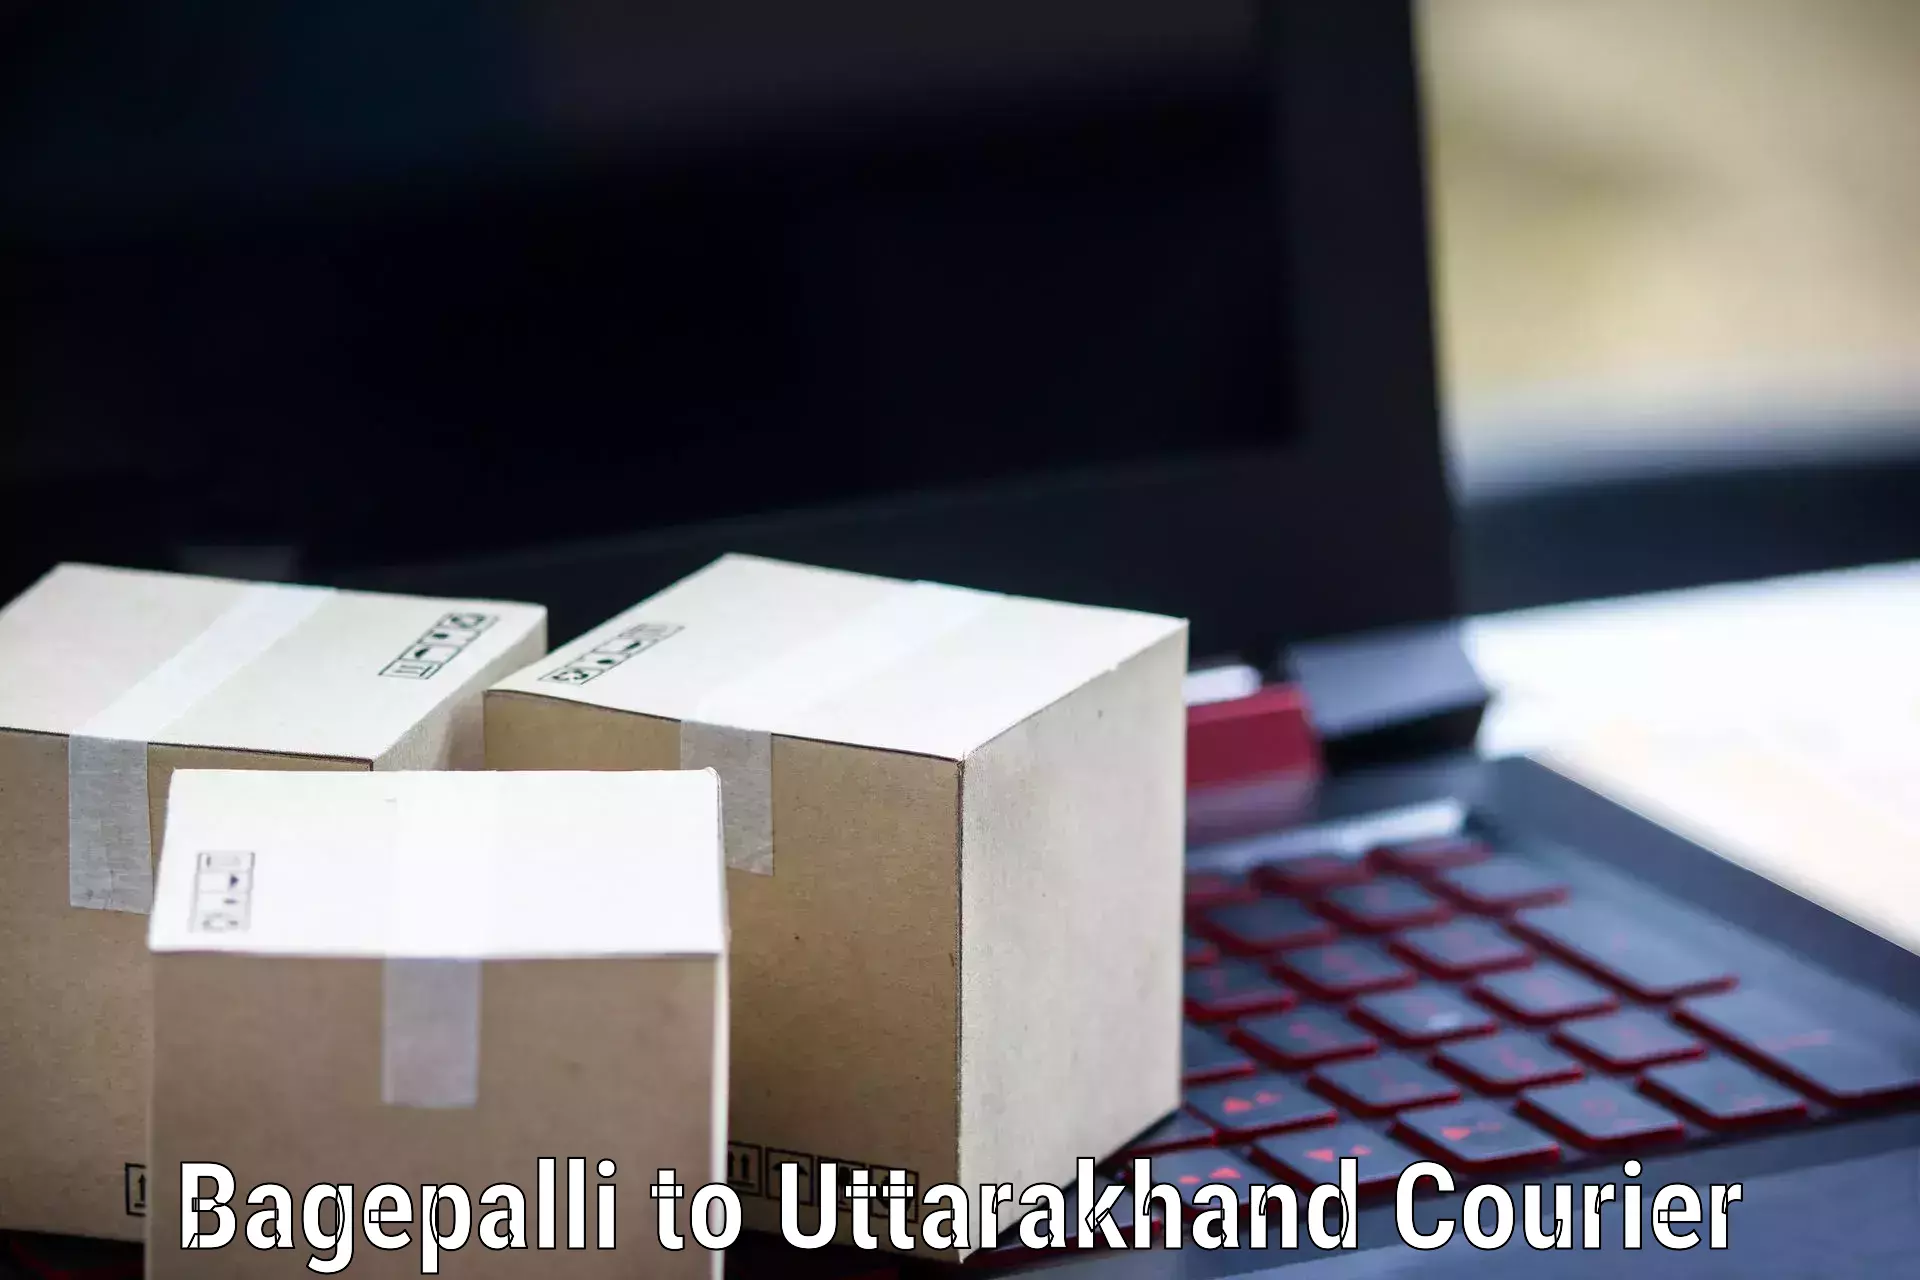 Express delivery capabilities in Bagepalli to Almora